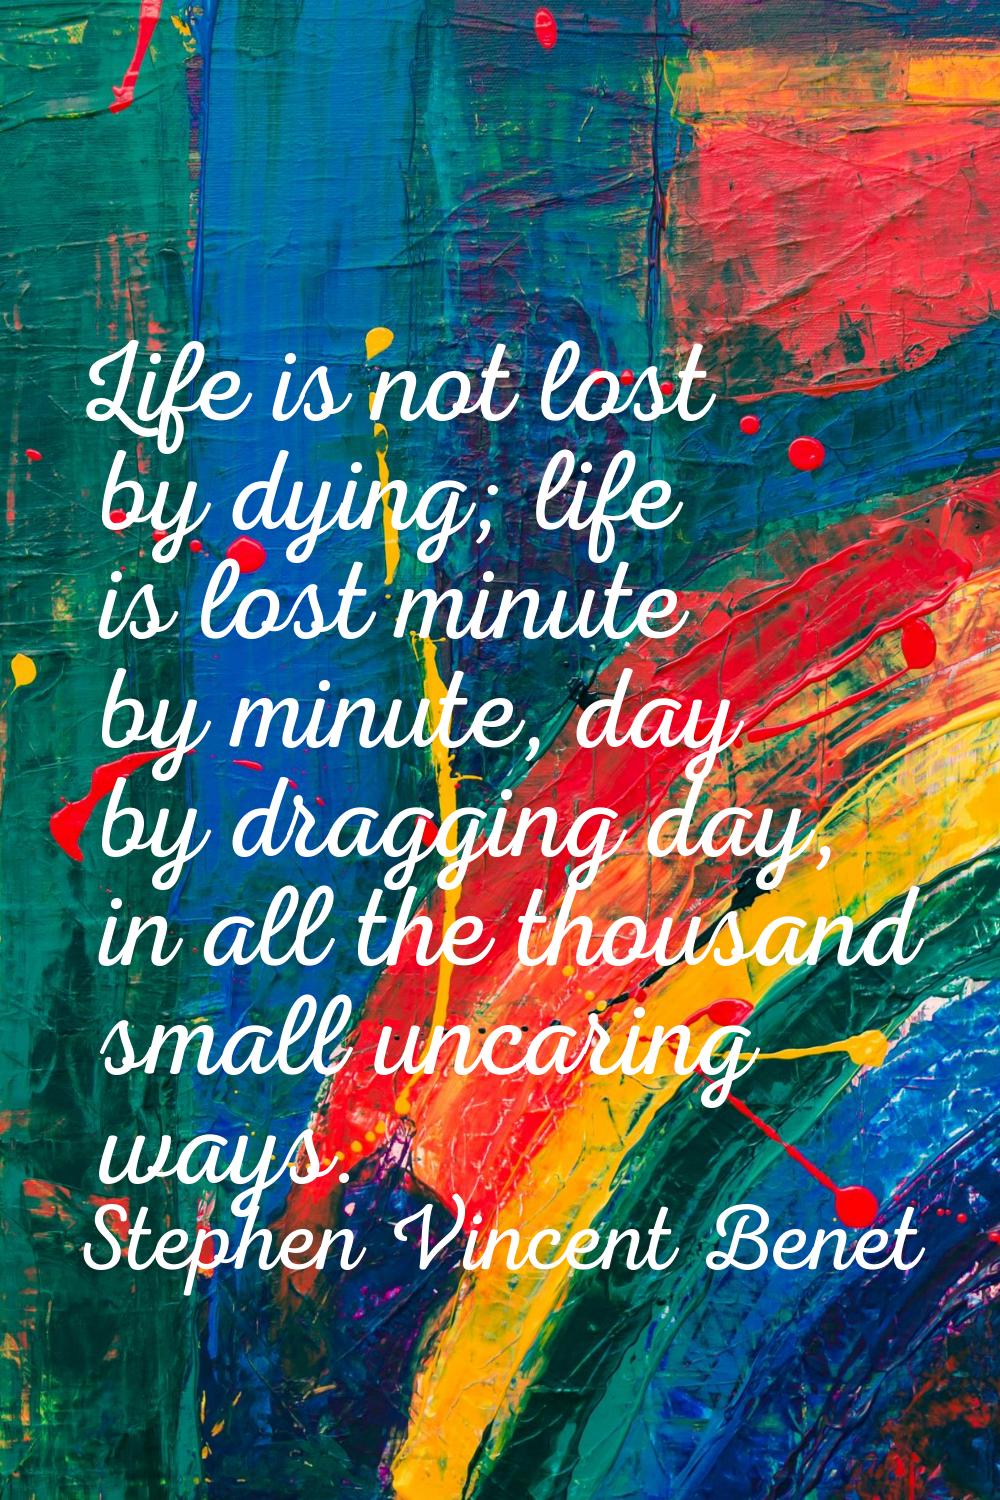 Life is not lost by dying; life is lost minute by minute, day by dragging day, in all the thousand 